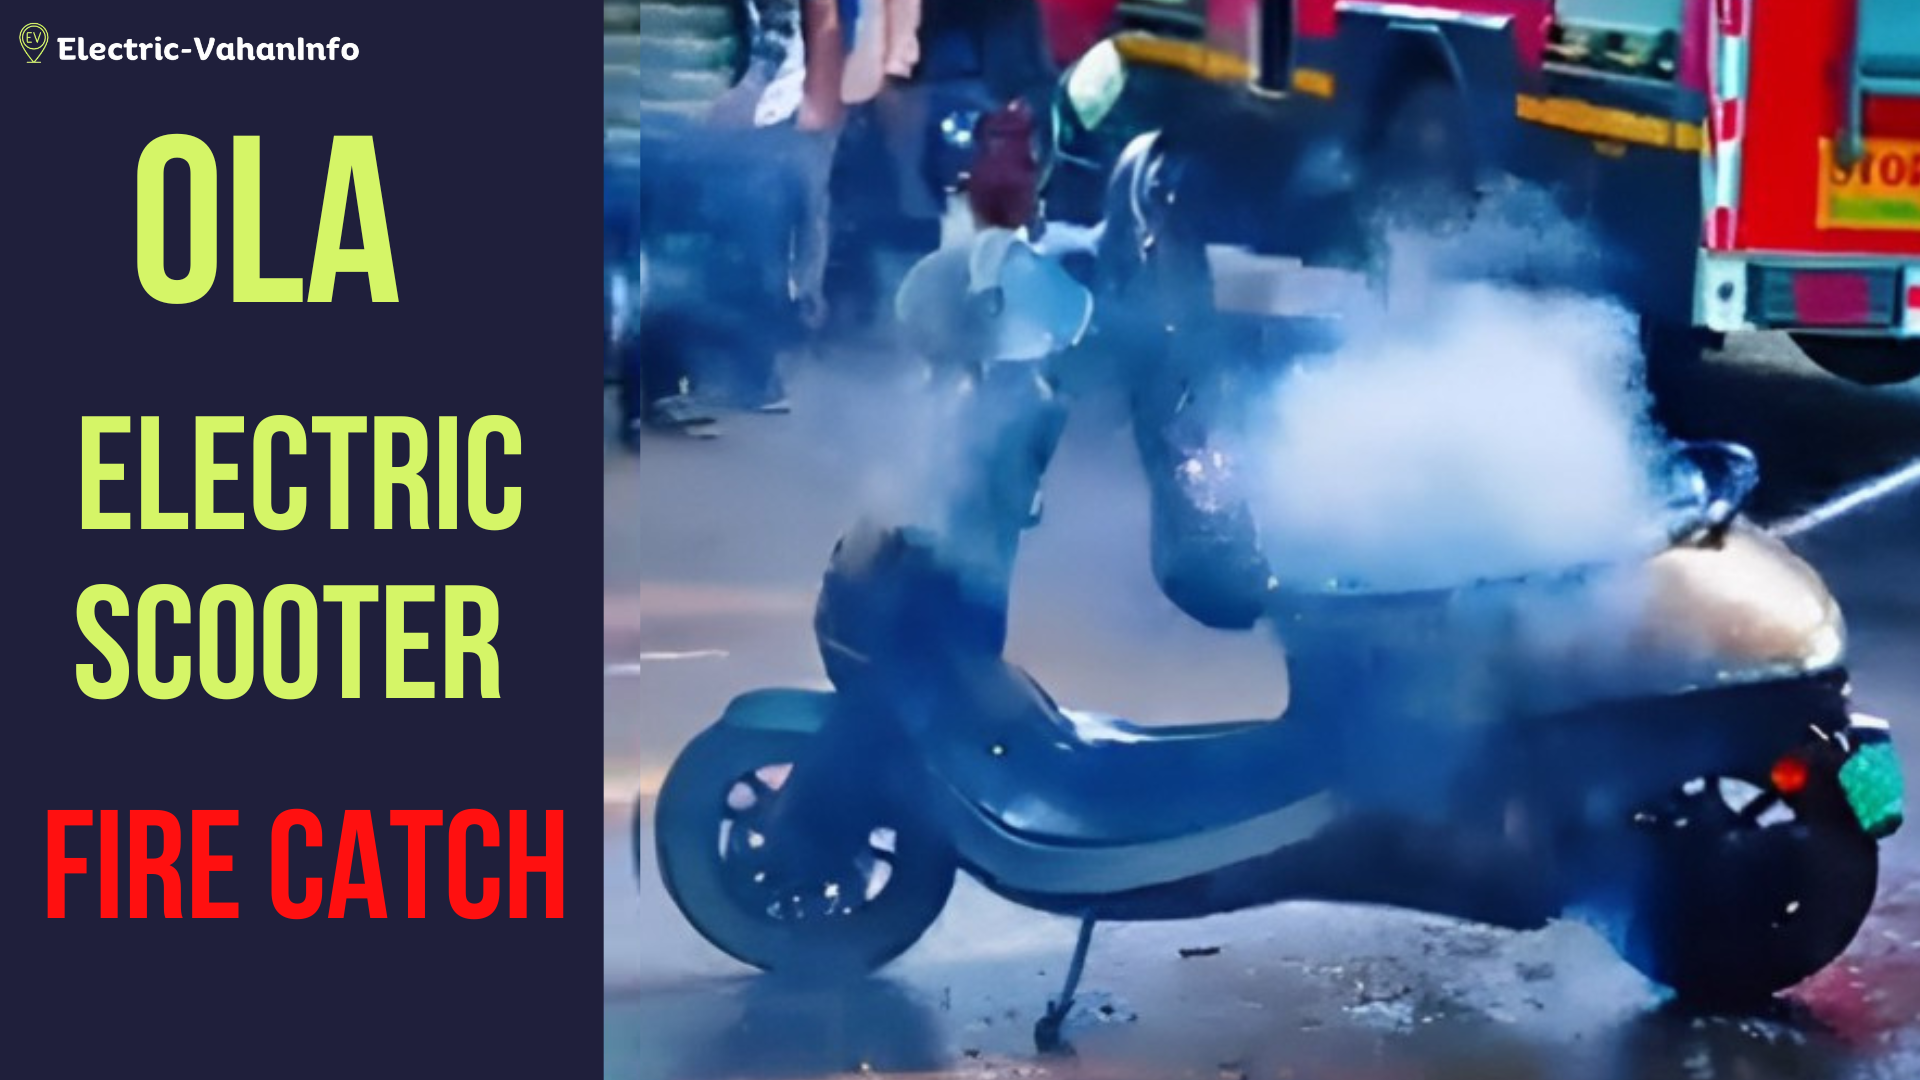 https://electric-vahaninfo.com/ola-electric-scooter-fire-catch-in-pune-and-companys-responds/